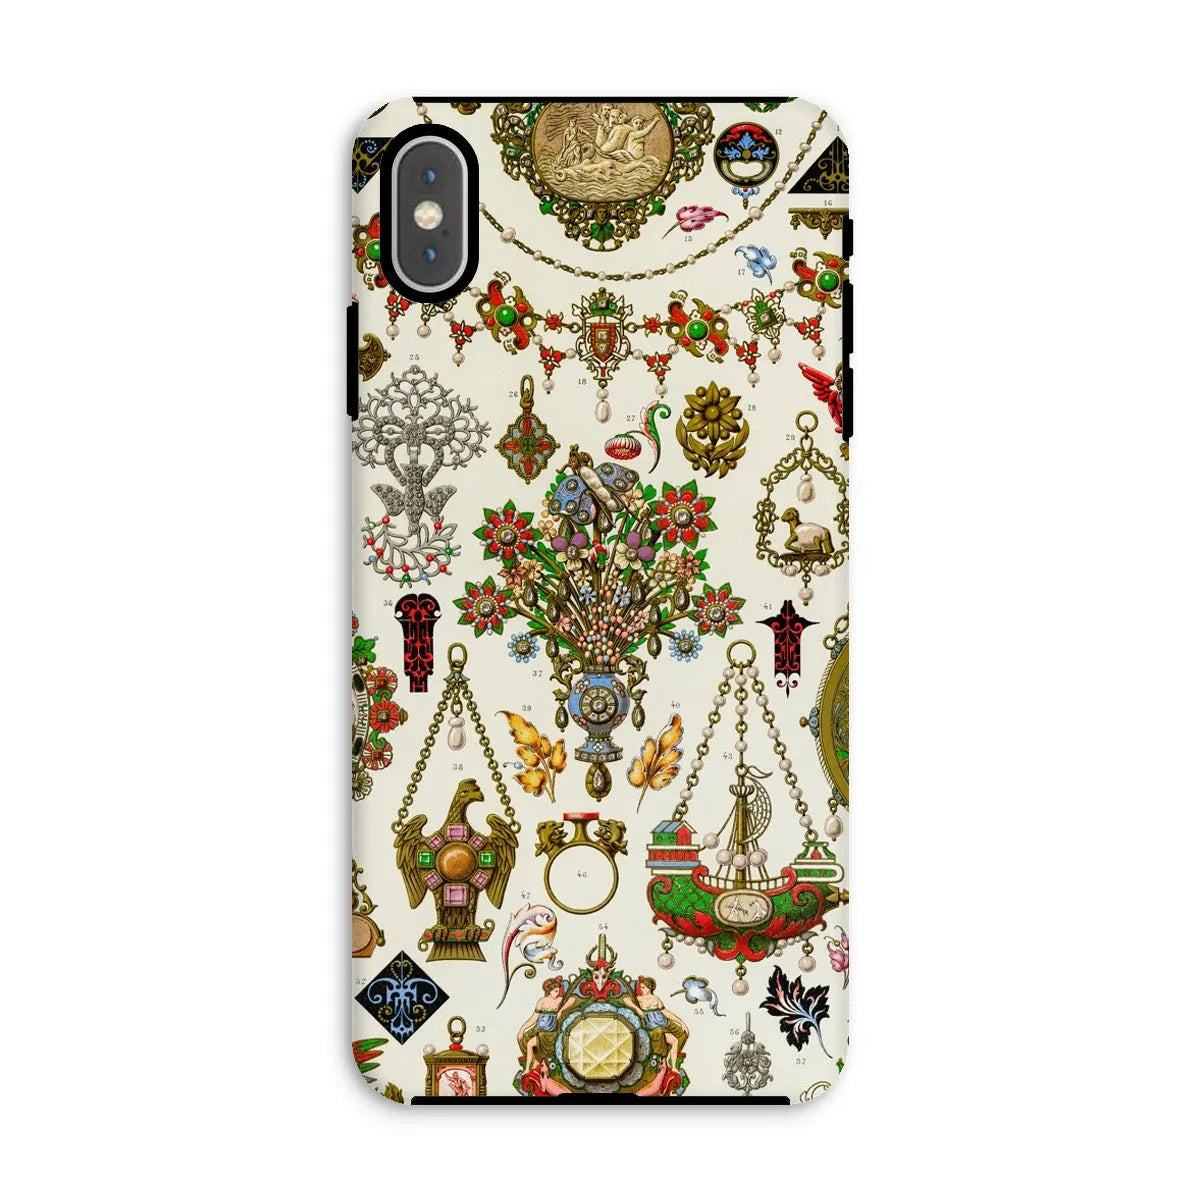 French Jewelry By Auguste Racinet Tough Phone Case - Iphone Xs Max / Matte - Mobile Phone Cases - Aesthetic Art